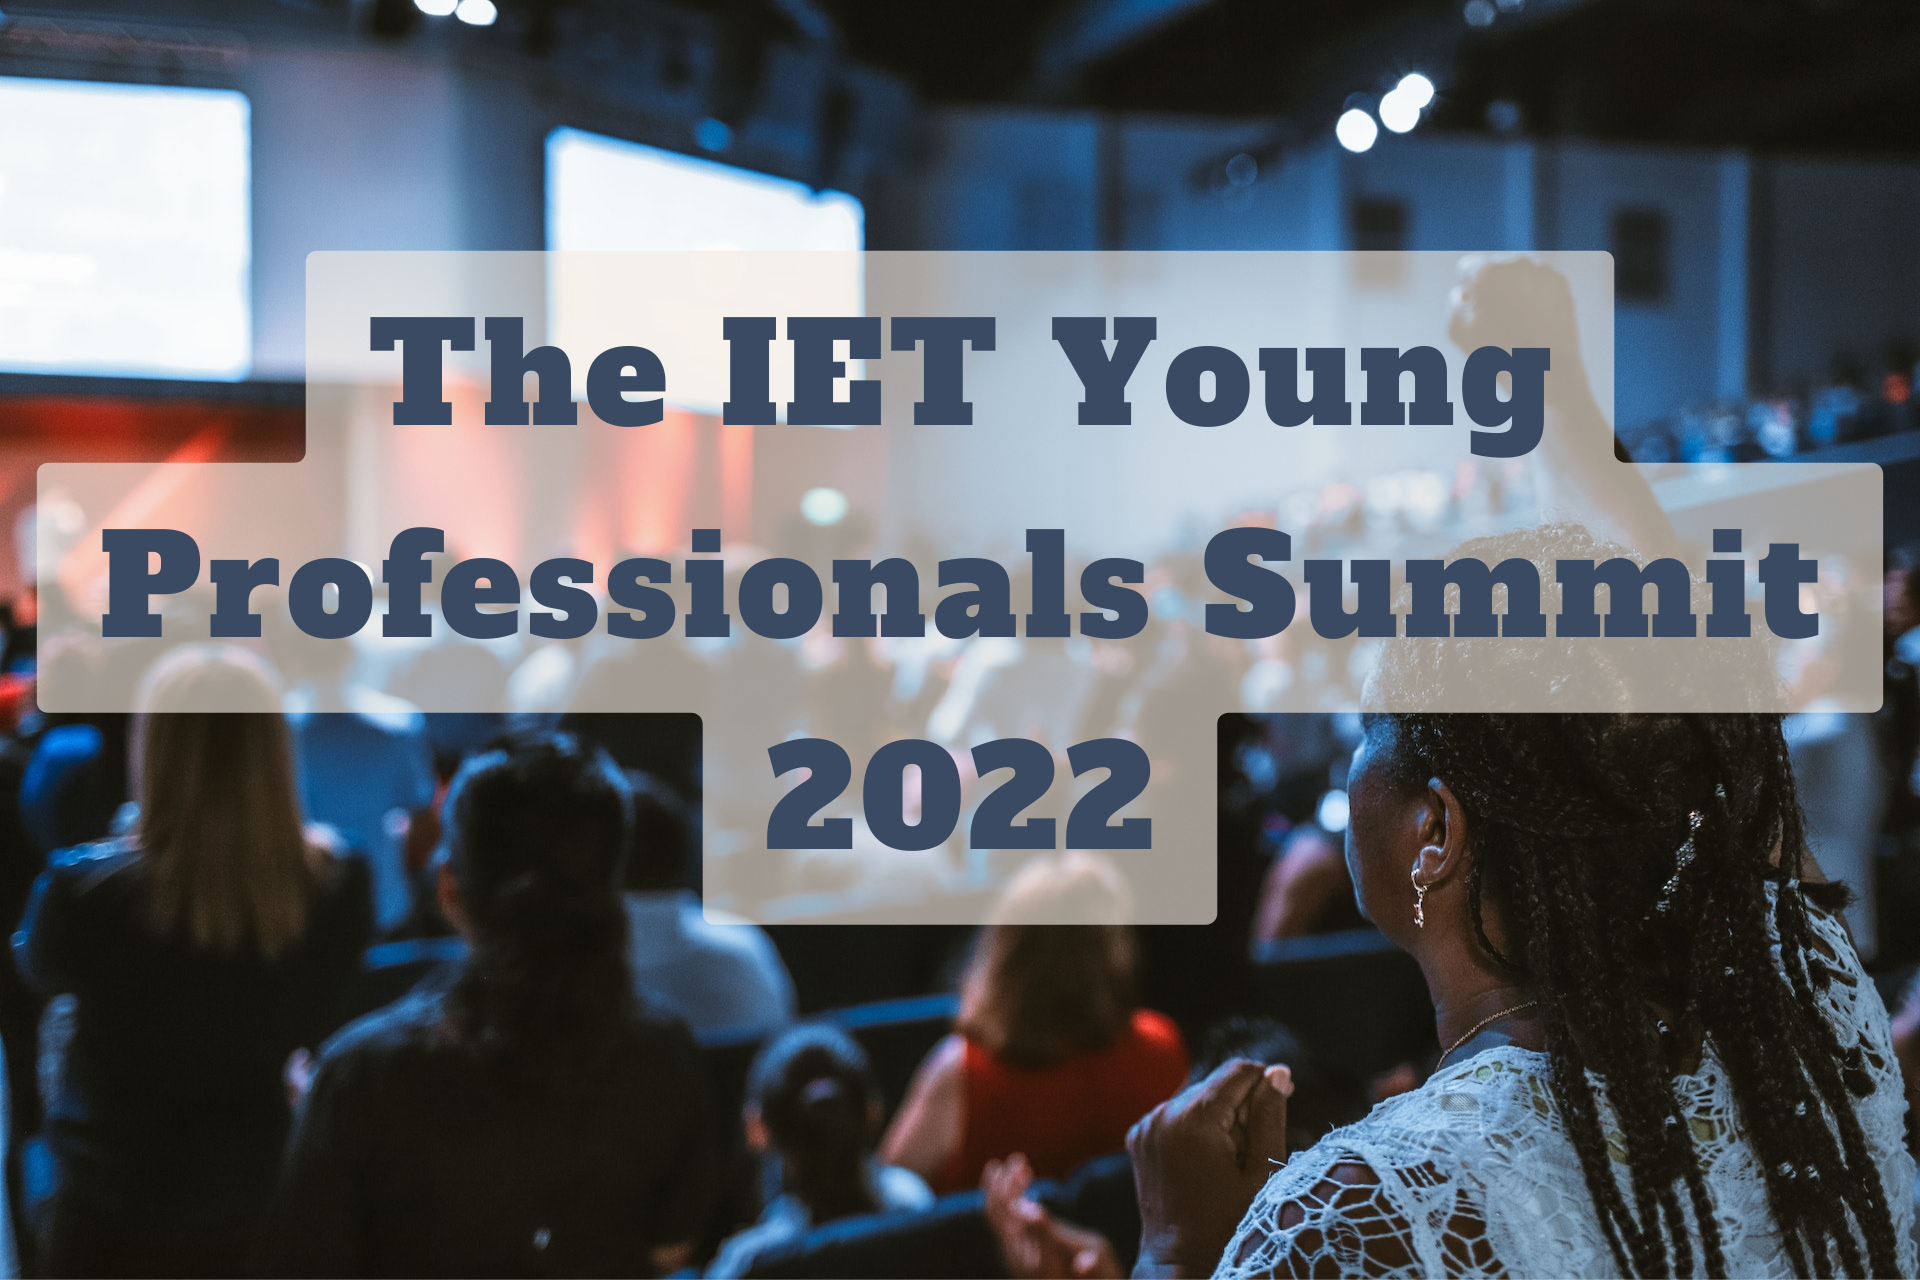 The IET Young Professionals SUmmit 2022